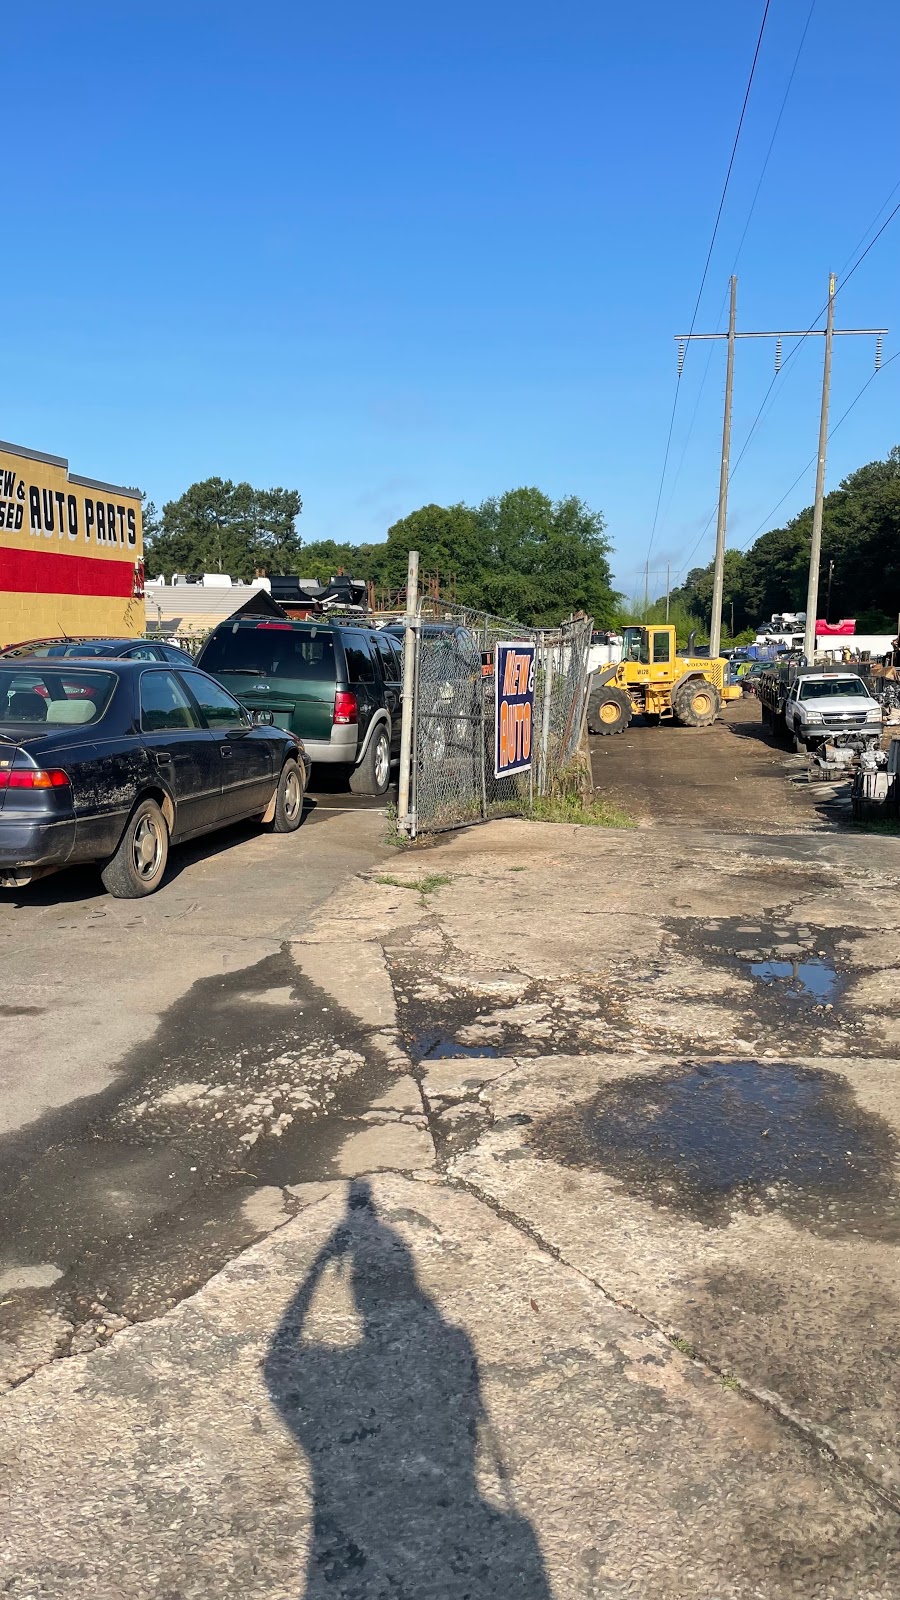 Andrews Auto Salvage. Inc | Photo 10 of 10 | Address: 2343 N Expy, Griffin, GA 30223, USA | Phone: (770) 233-3881